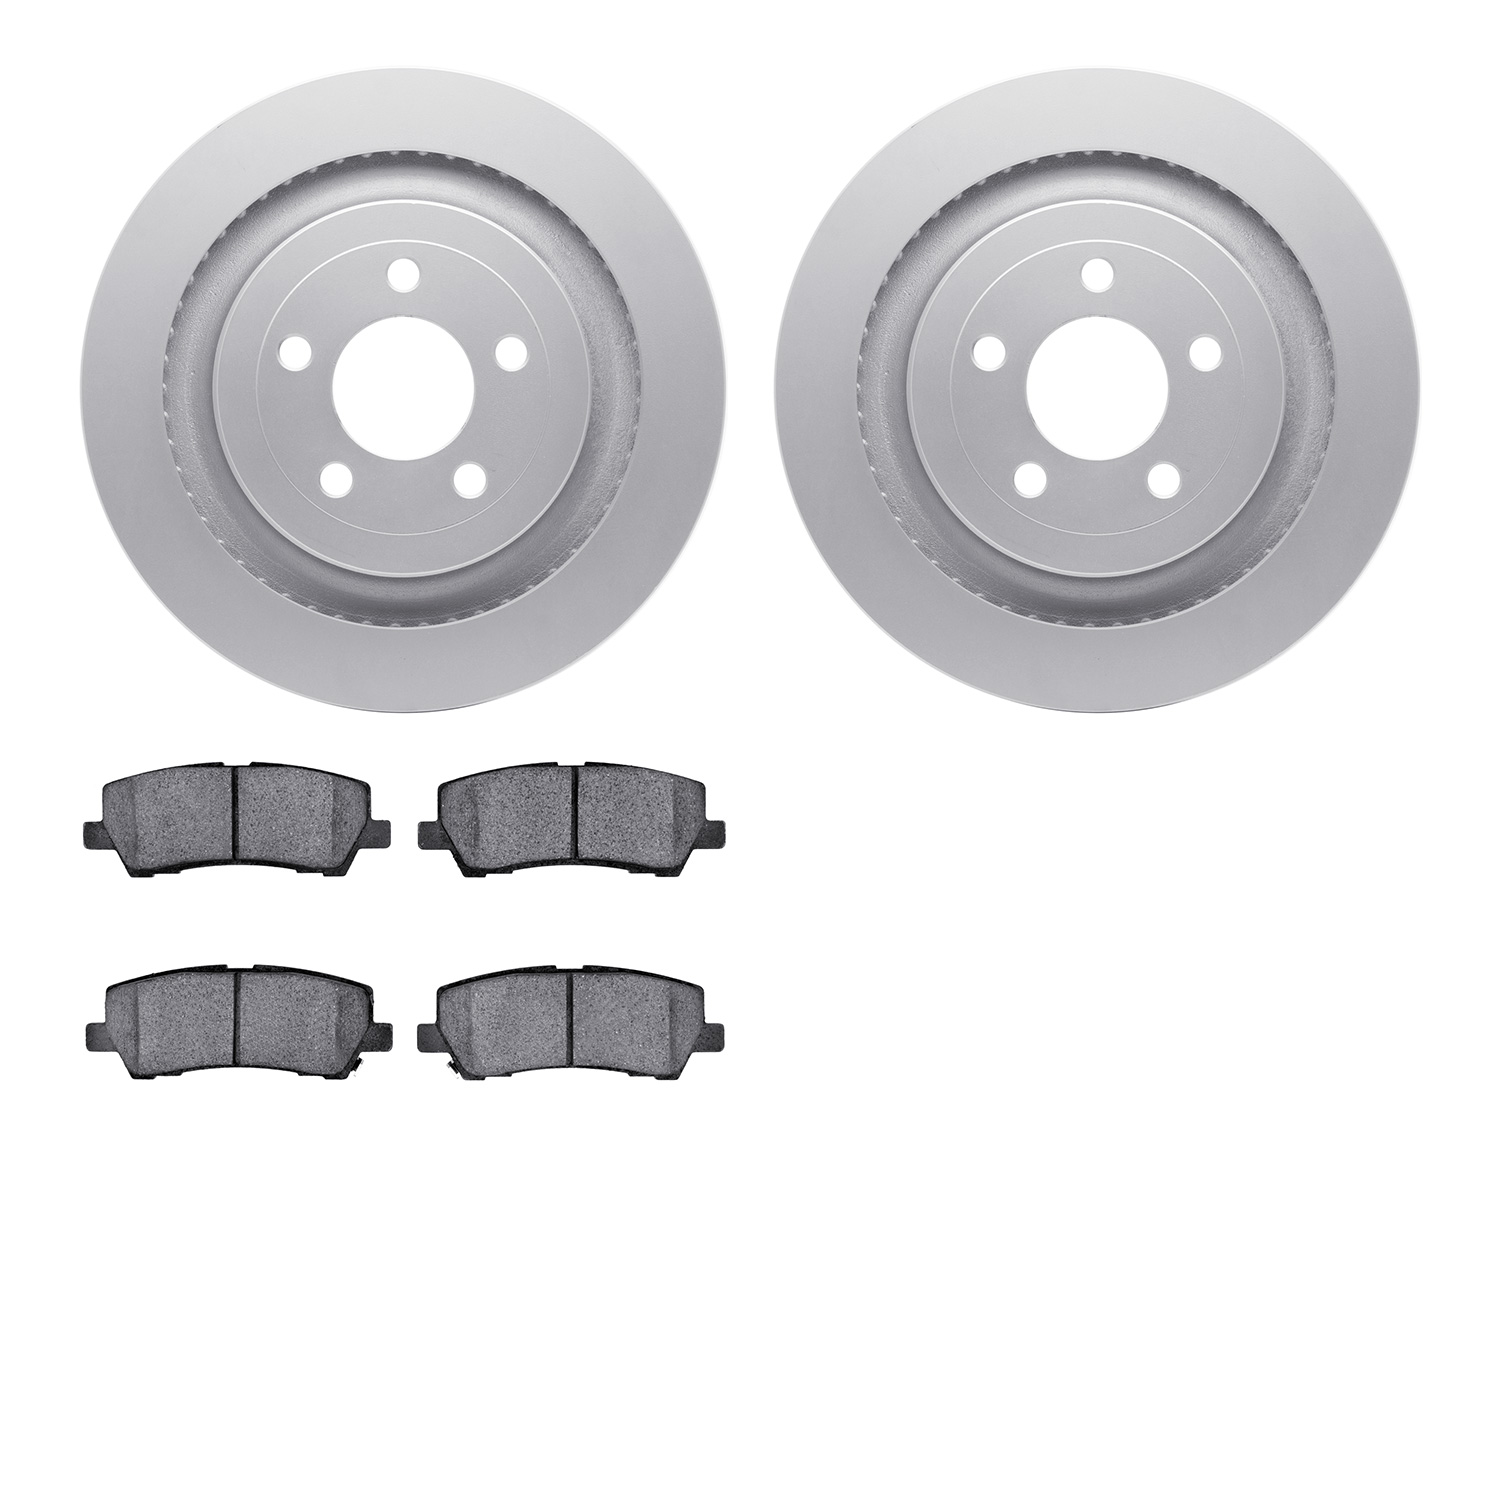 4302-54145 Geospec Brake Rotors with 3000-Series Ceramic Brake Pads Kit, Fits Select Ford/Lincoln/Mercury/Mazda, Position: Rear